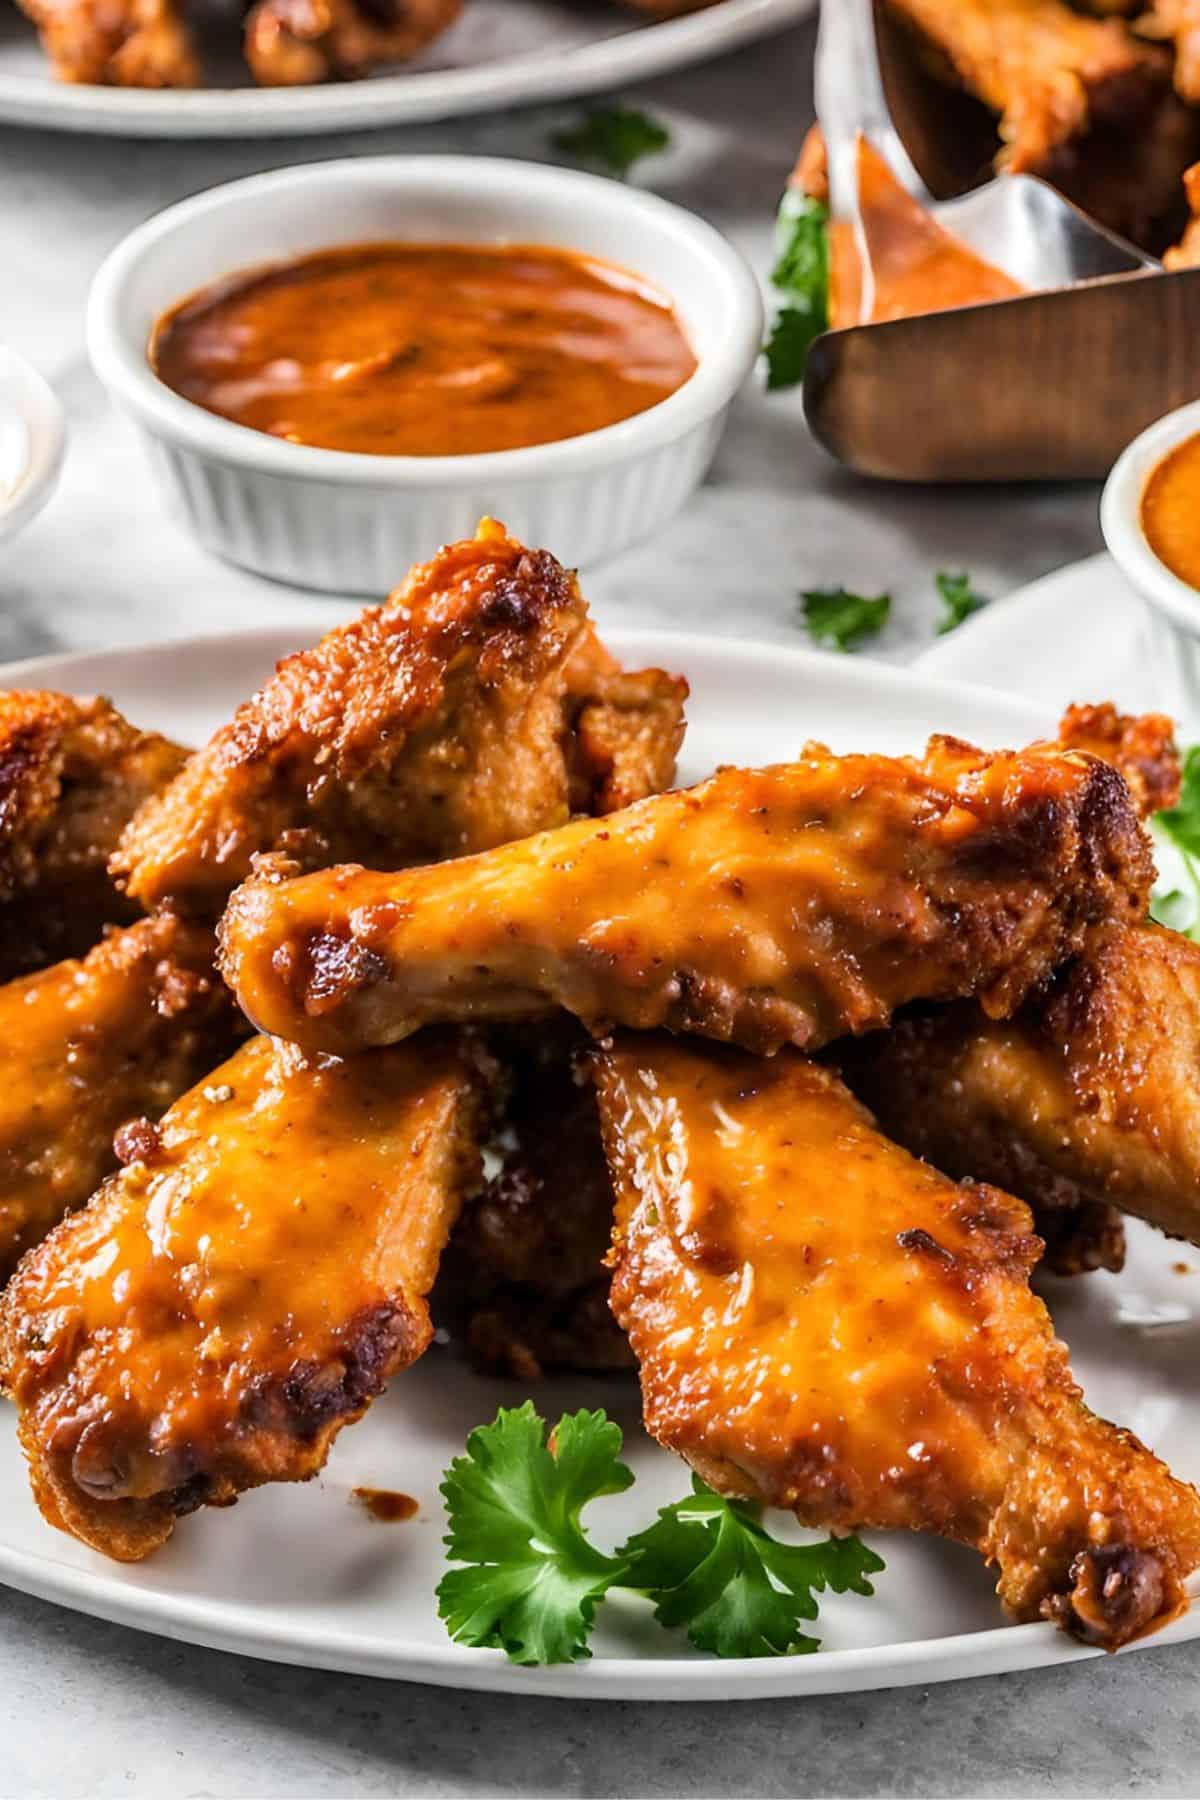 The best baked chicken wings recipe ever, coated in a flavorful sauce, showcased on a white plate.